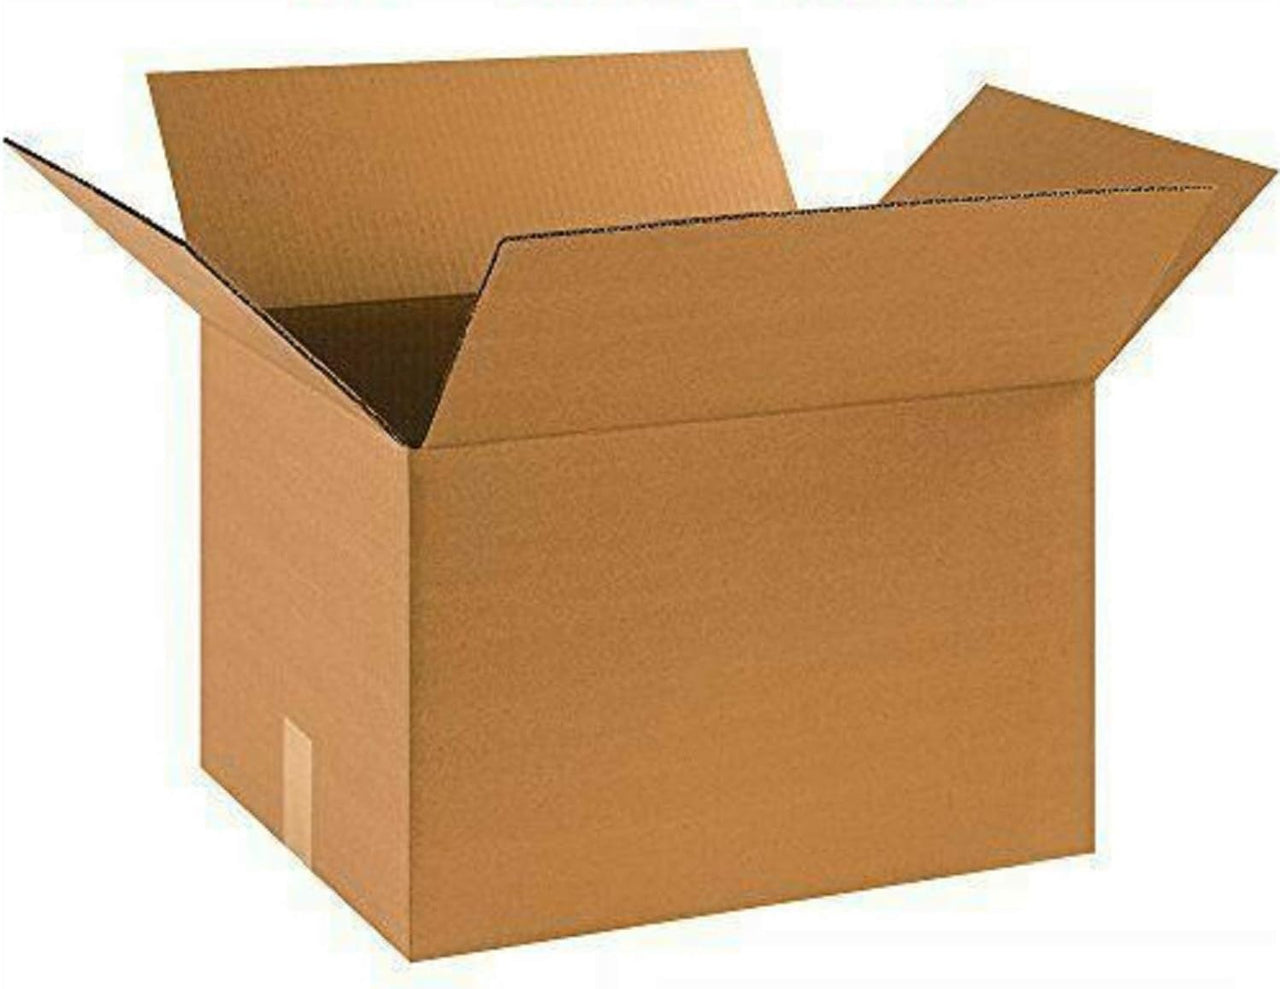 Shipping Boxes 12"L x 12"W x 12"H 50-Pack Corrugated Cardboard Box for Packing Moving Storage